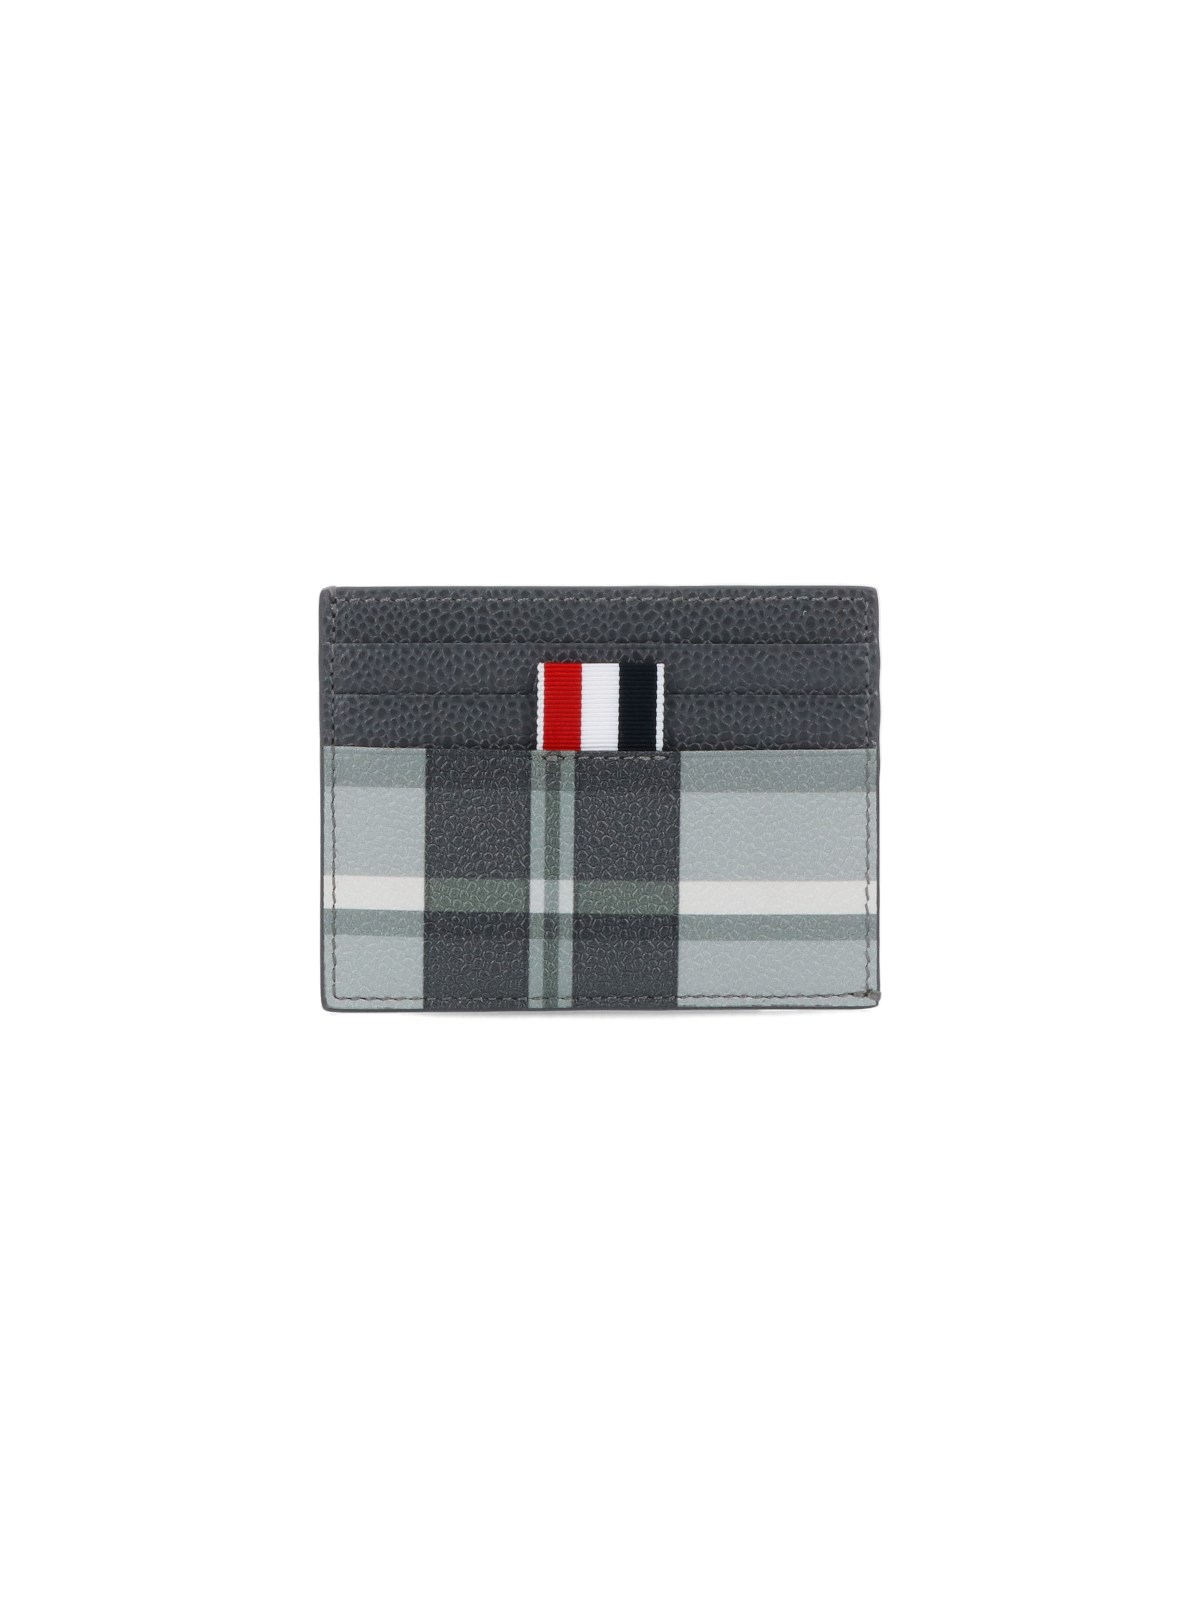 Thom Browne "4 Bar" Card Holder In Gray